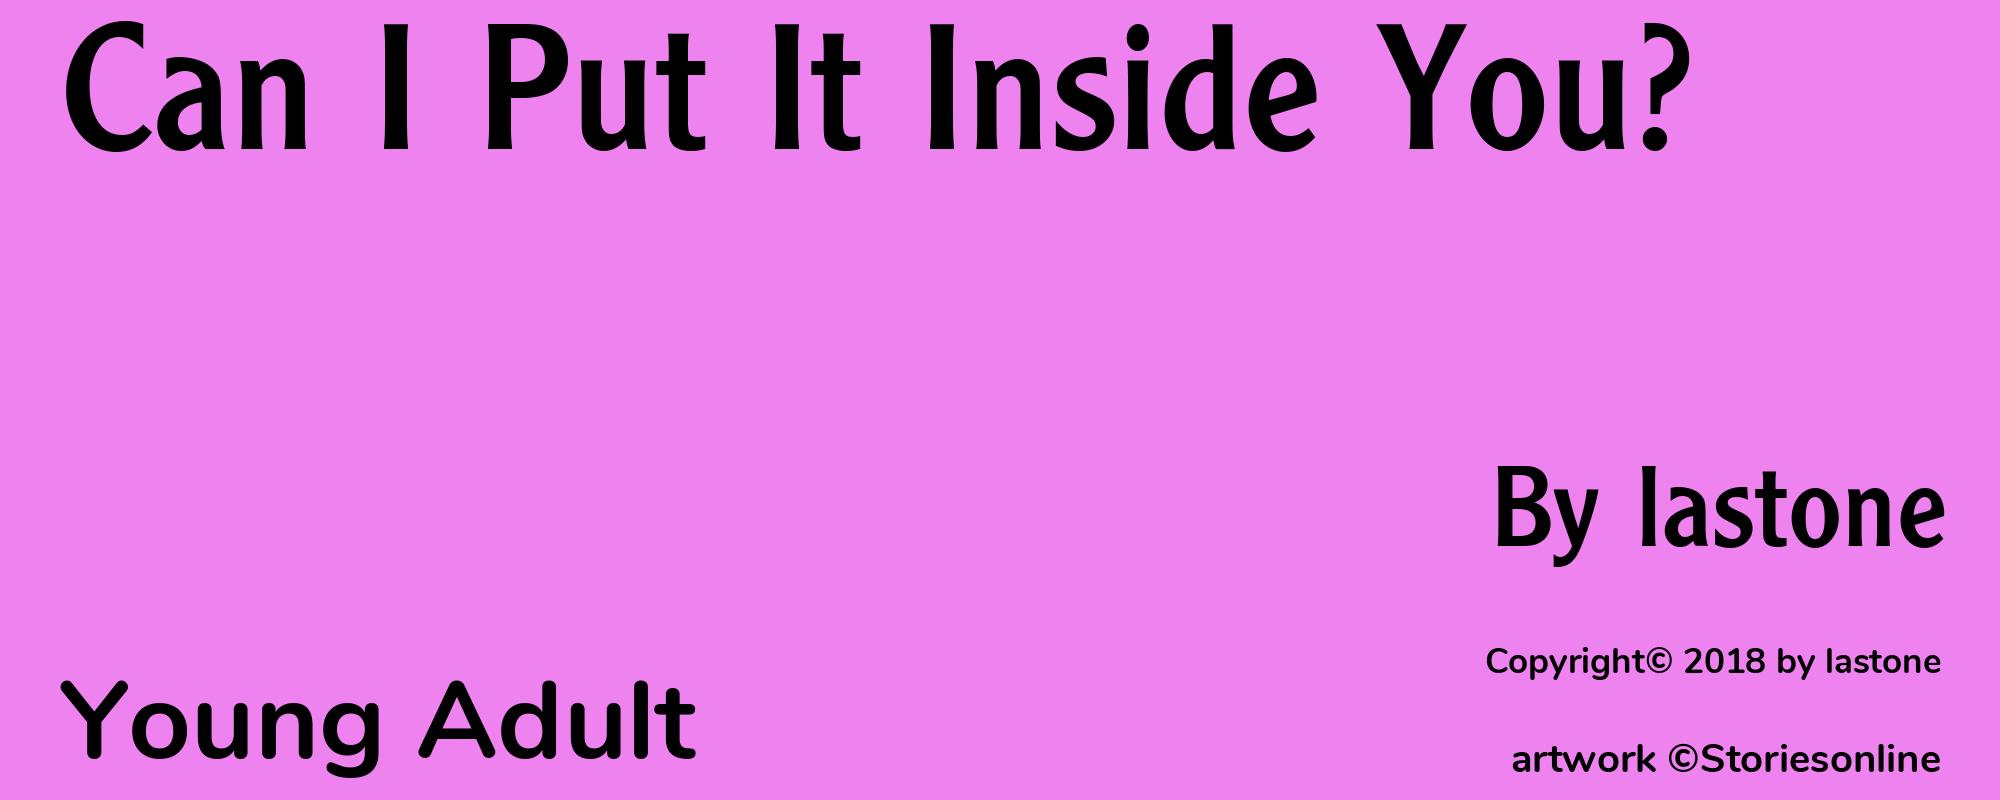 Can I Put It Inside You? - Cover